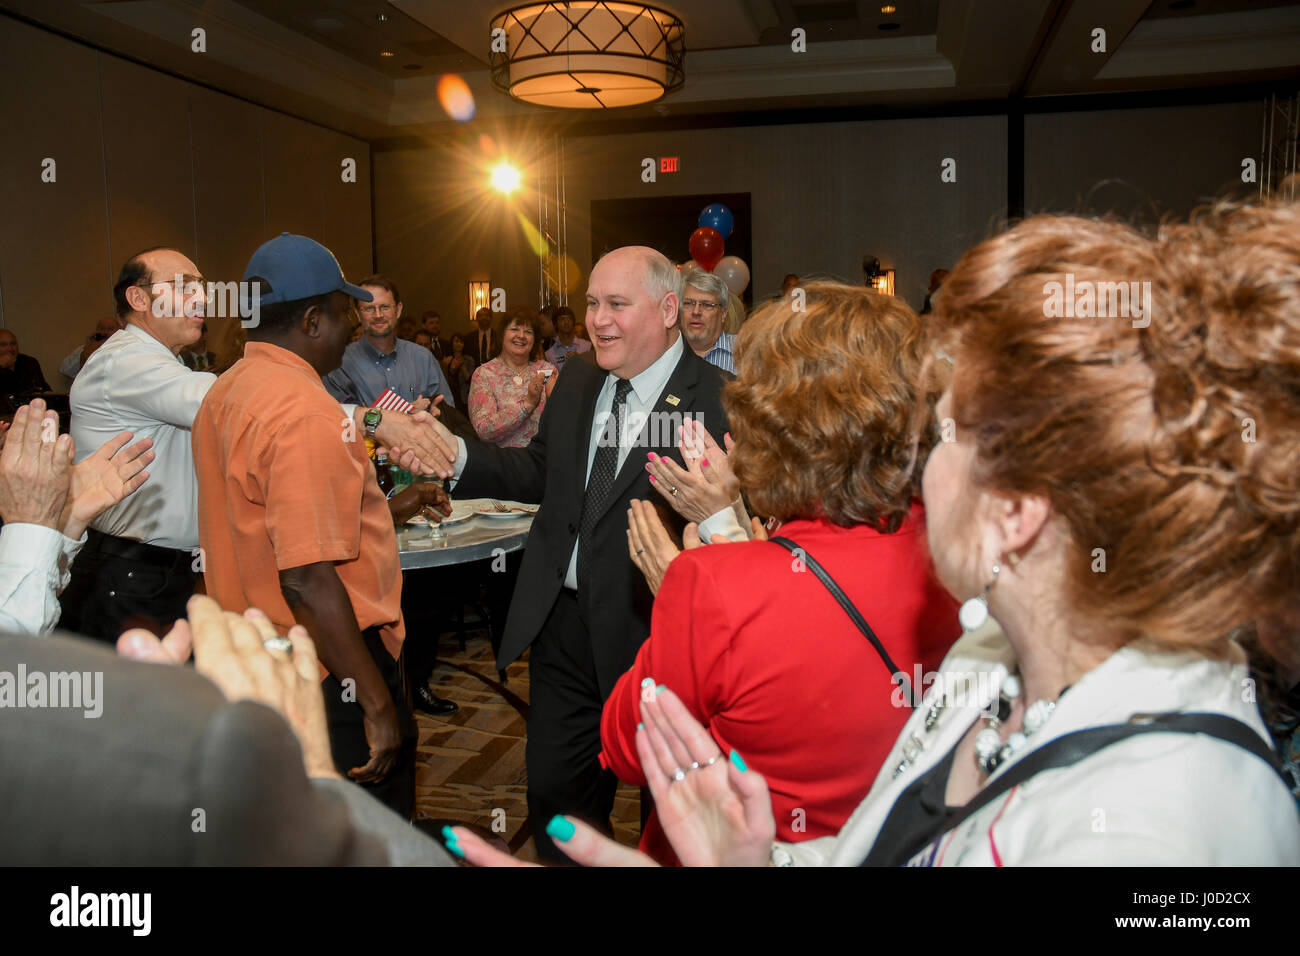 Wichita, U.S. 11th Apr, 2017. Republican Ron Estes the current Kansas State Treasurer wins the special election to fill the 4th congressional seat shakes hands with supporters at the victory party, Wichita Kansas, April 11, 2017. Credit: mark reinstein/Alamy Live News Stock Photo